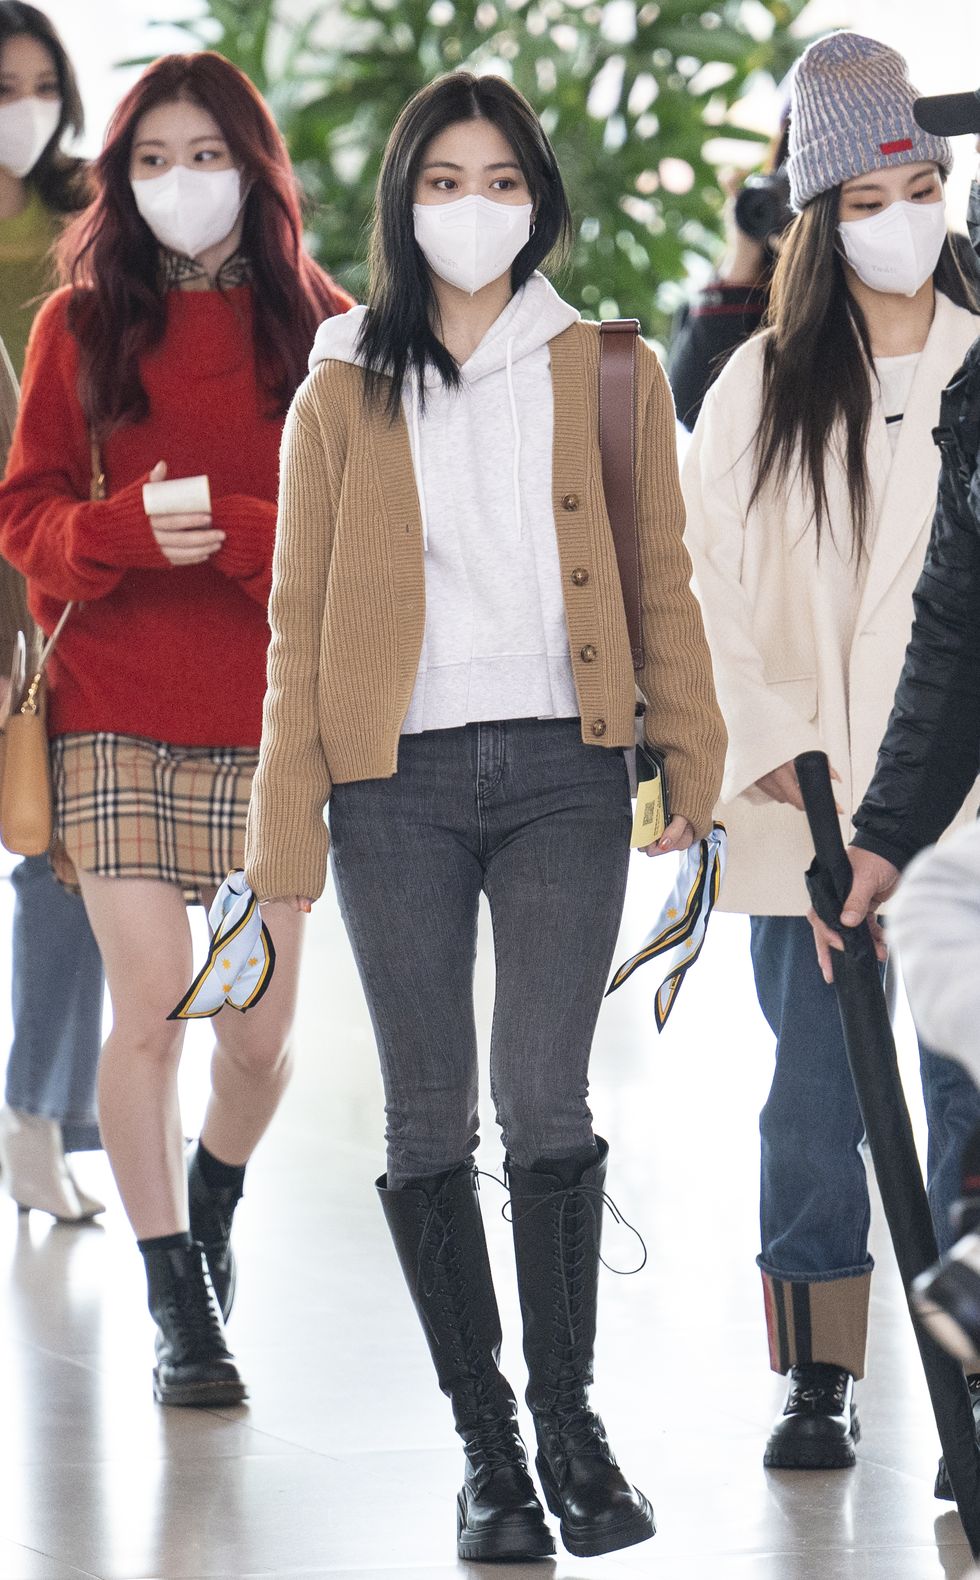 ryu jin of itzy poses for pictures after she arrived at gimpo international airport on nov 9th in gimpo, south korea photoosen